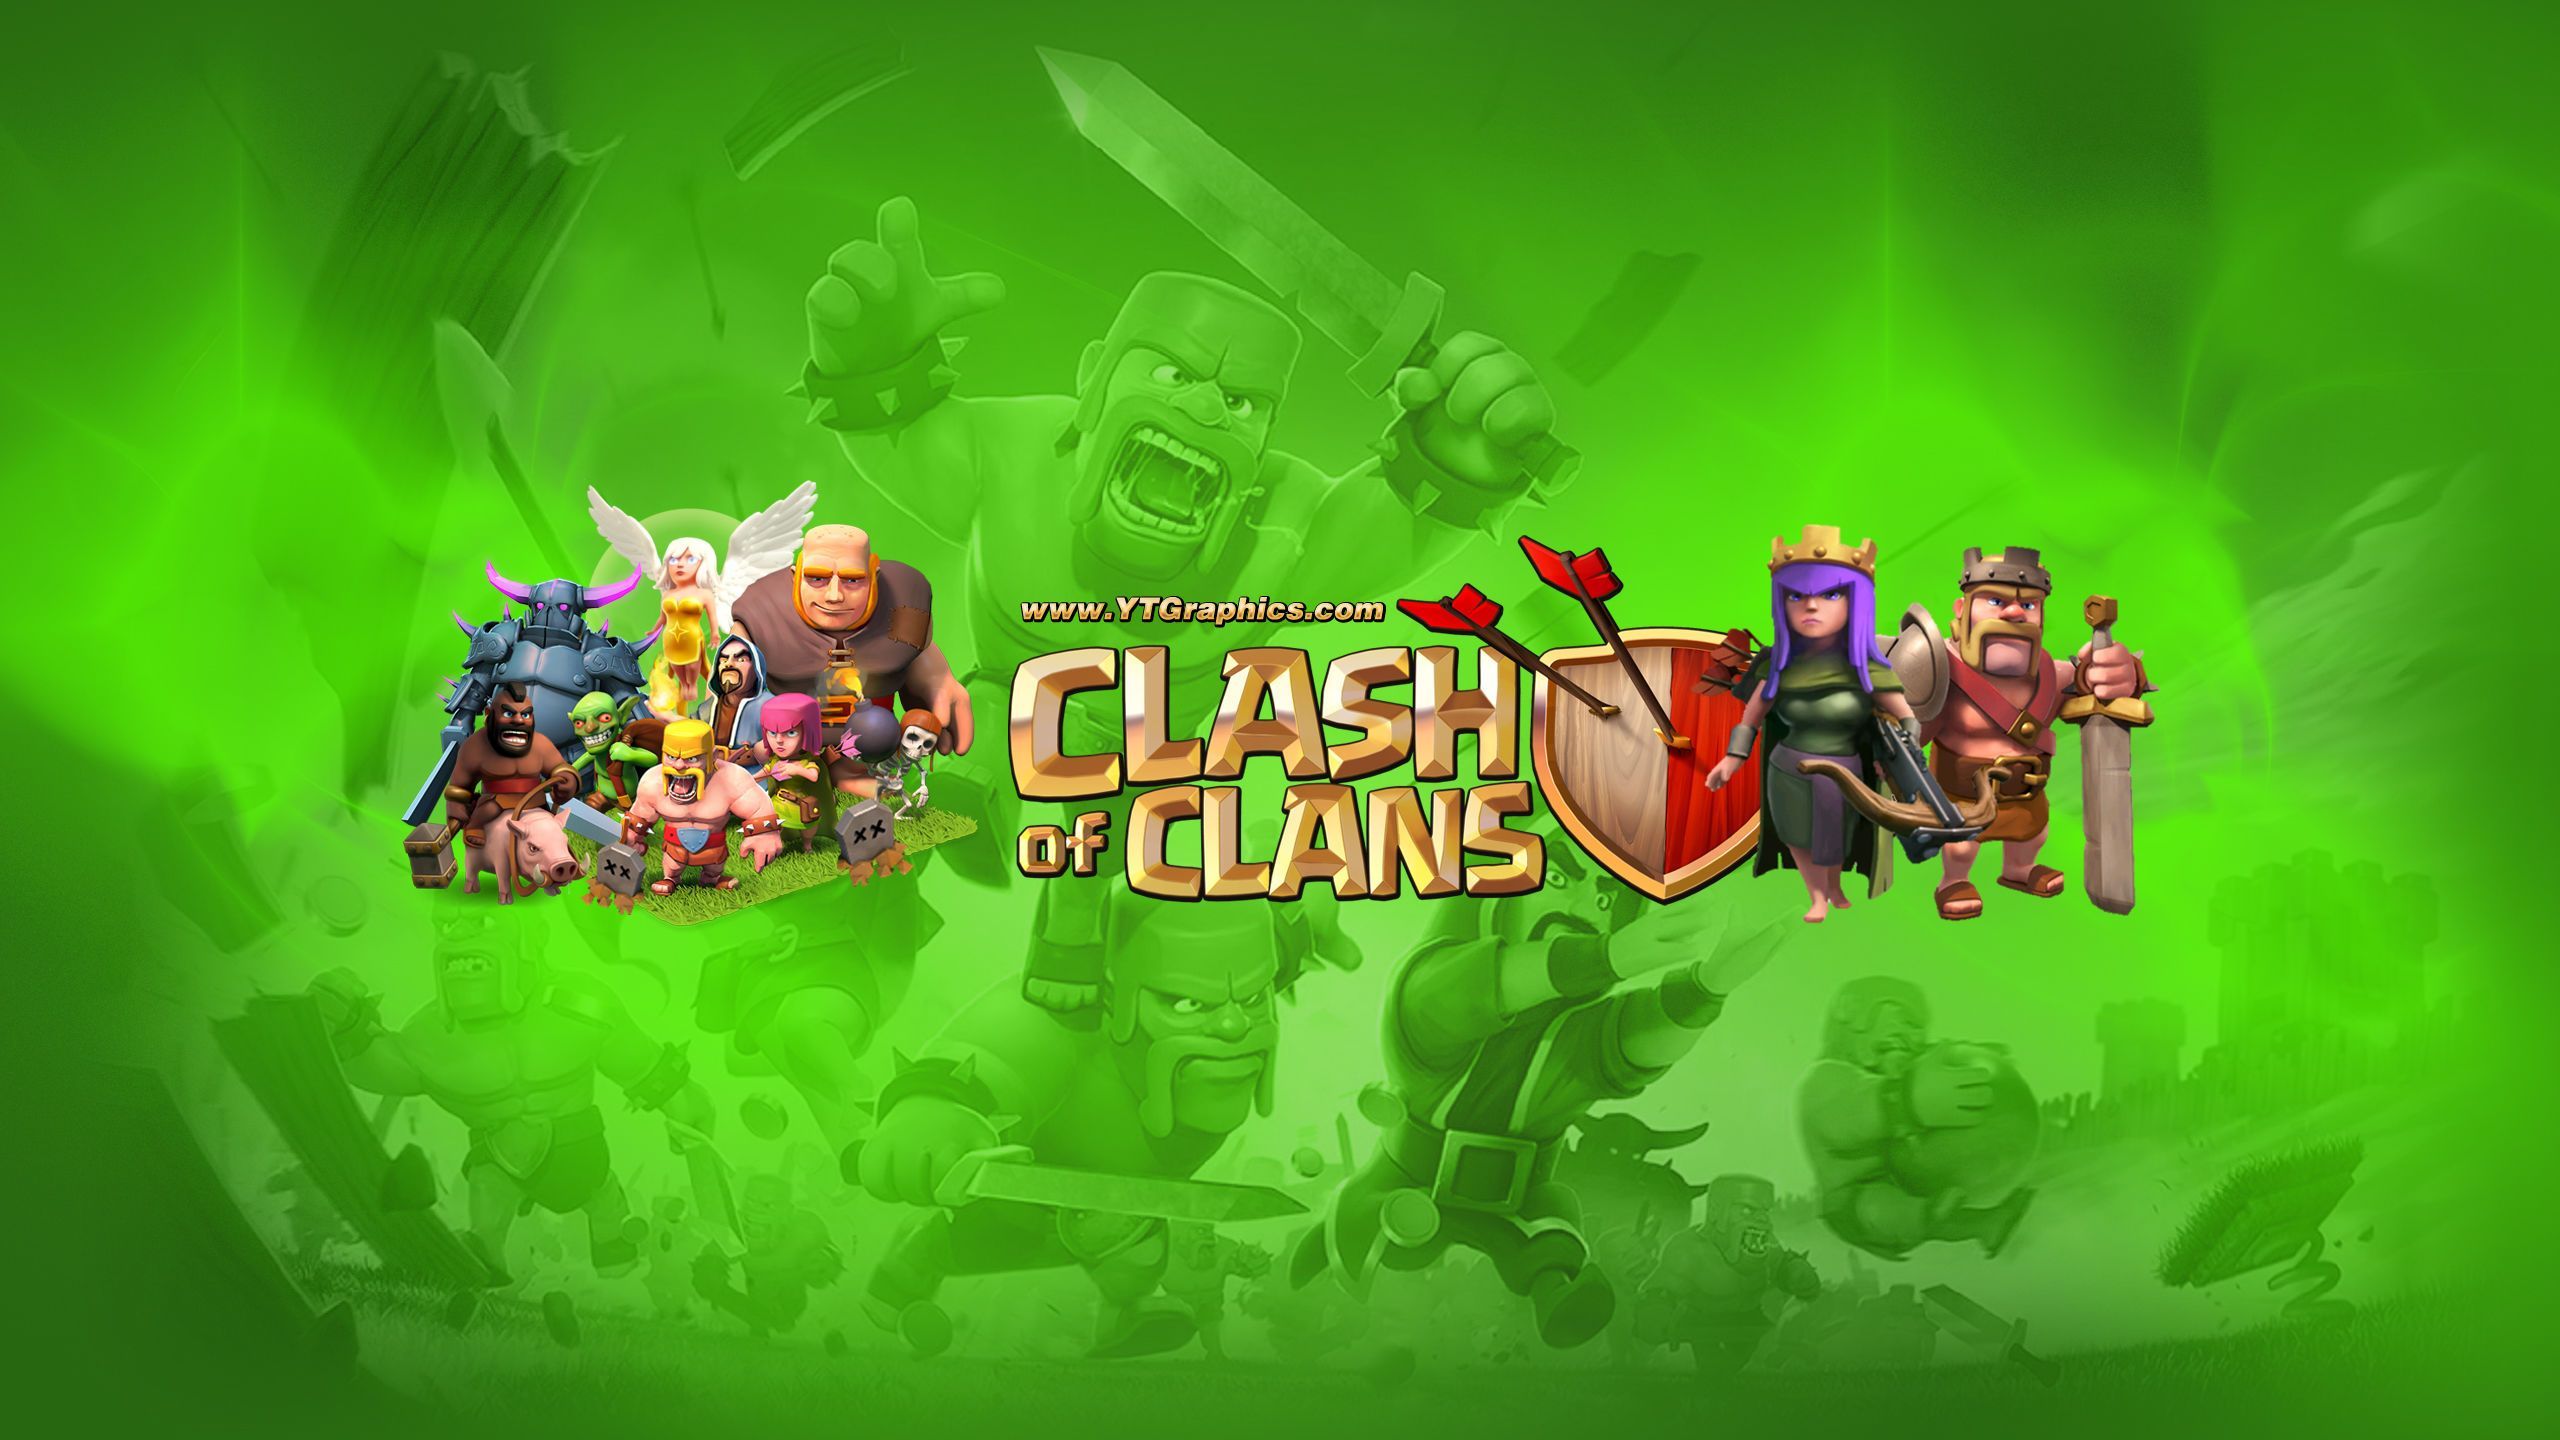 Download Clash Of Clans Youtube Banner for desktop or mobile device. Make your device cooler and more beautiful. Youtube banners, Banner, Gaming banner